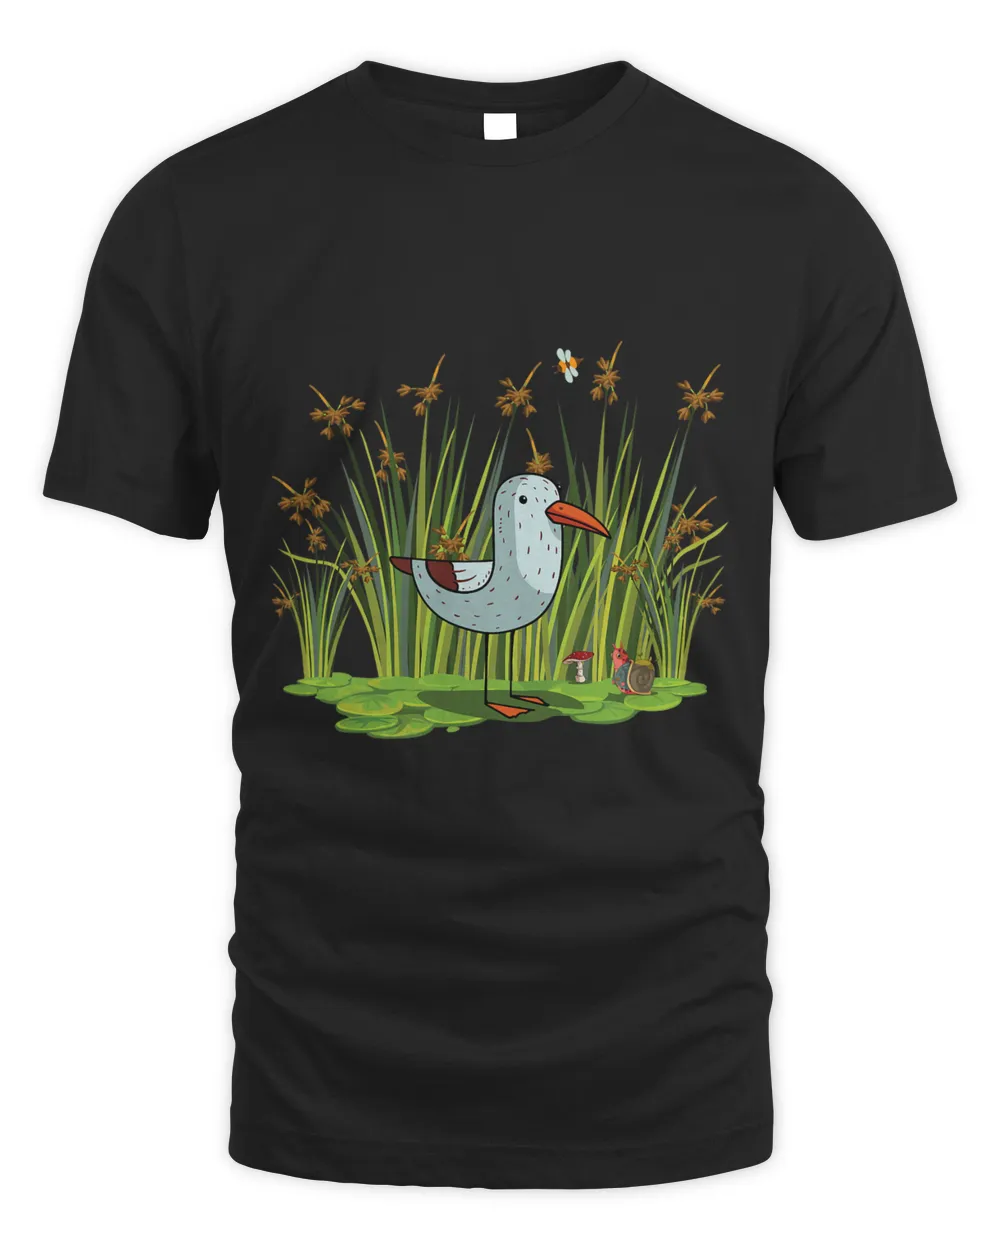 Cottagecore Swamp Bird Relaxing in Countrycore Aesthetic